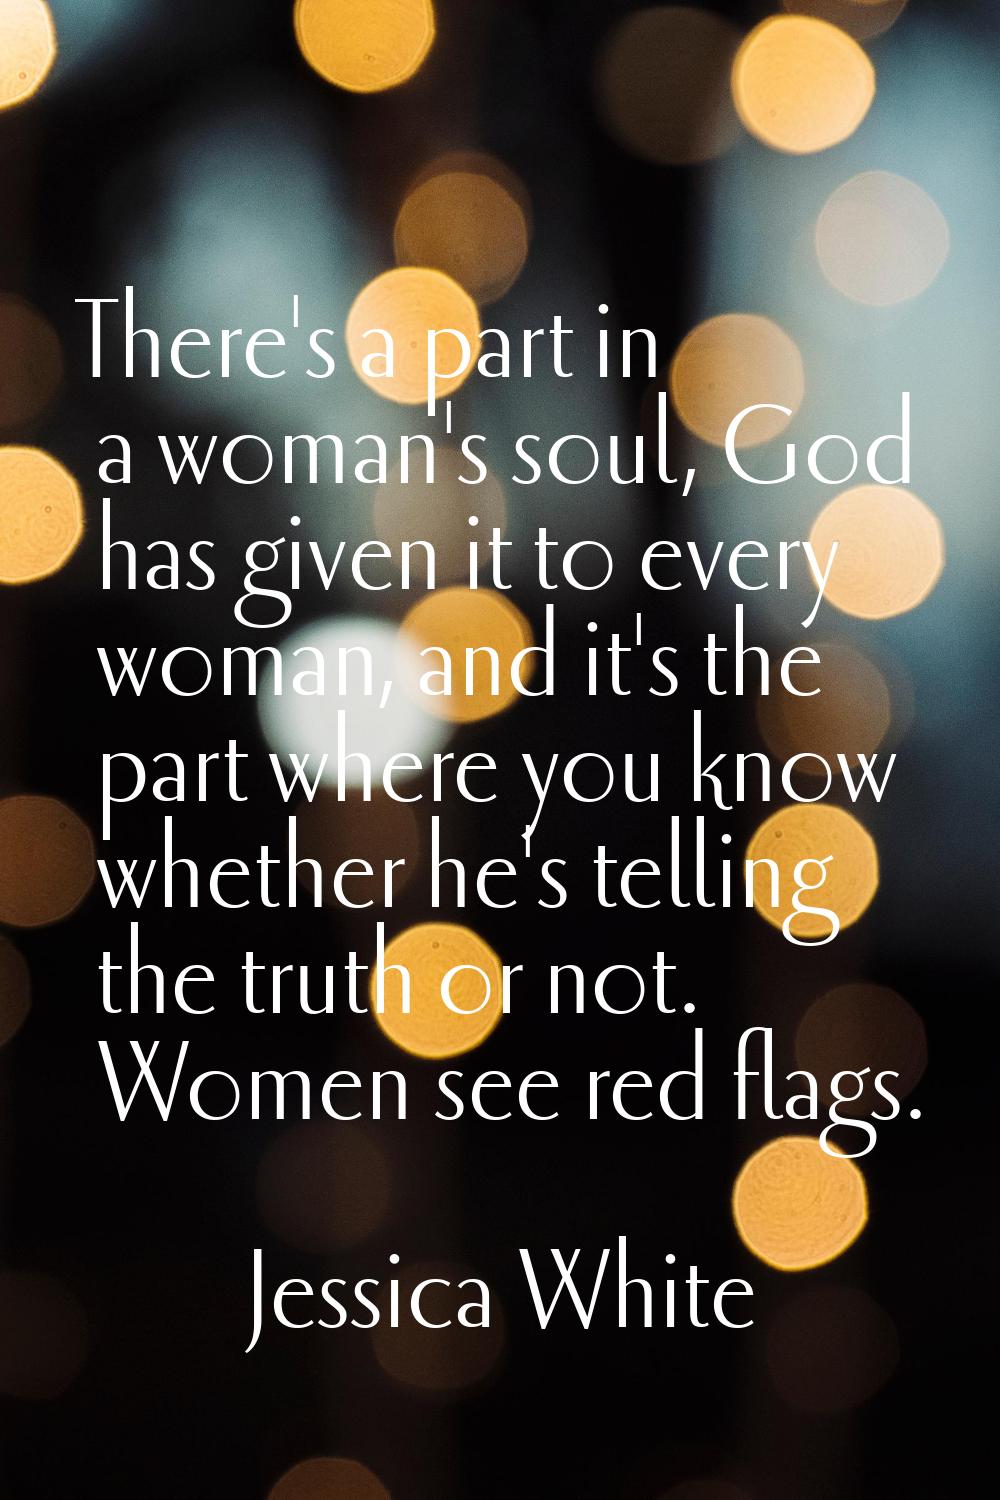 There's a part in a woman's soul, God has given it to every woman, and it's the part where you know